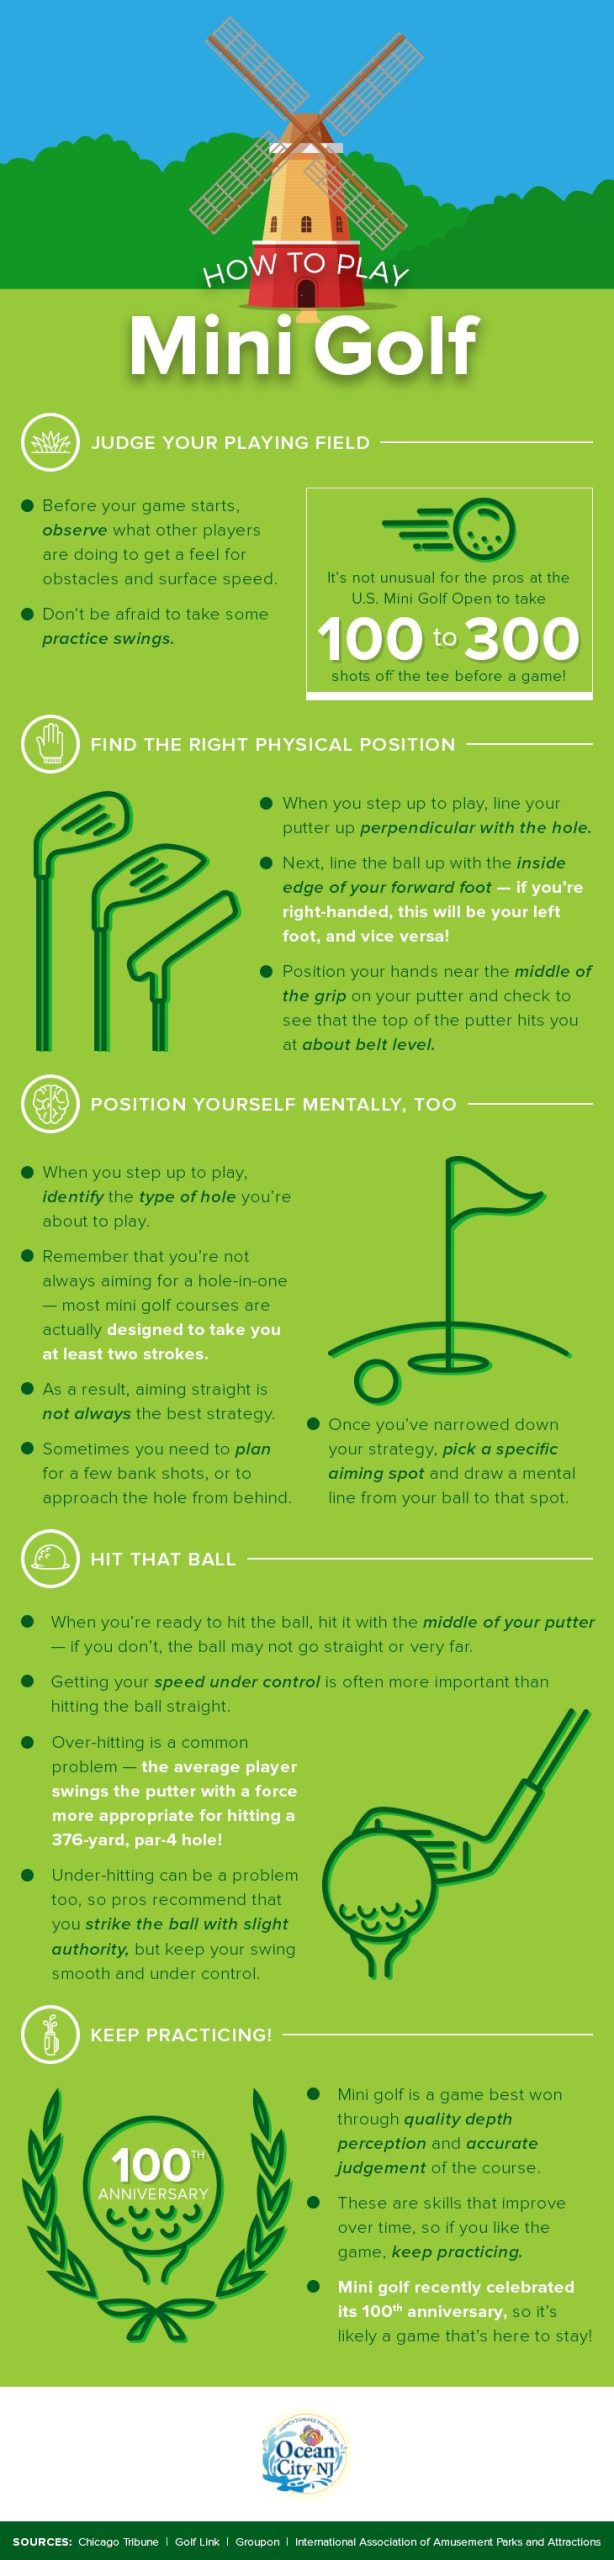 how to play mini golf infographic